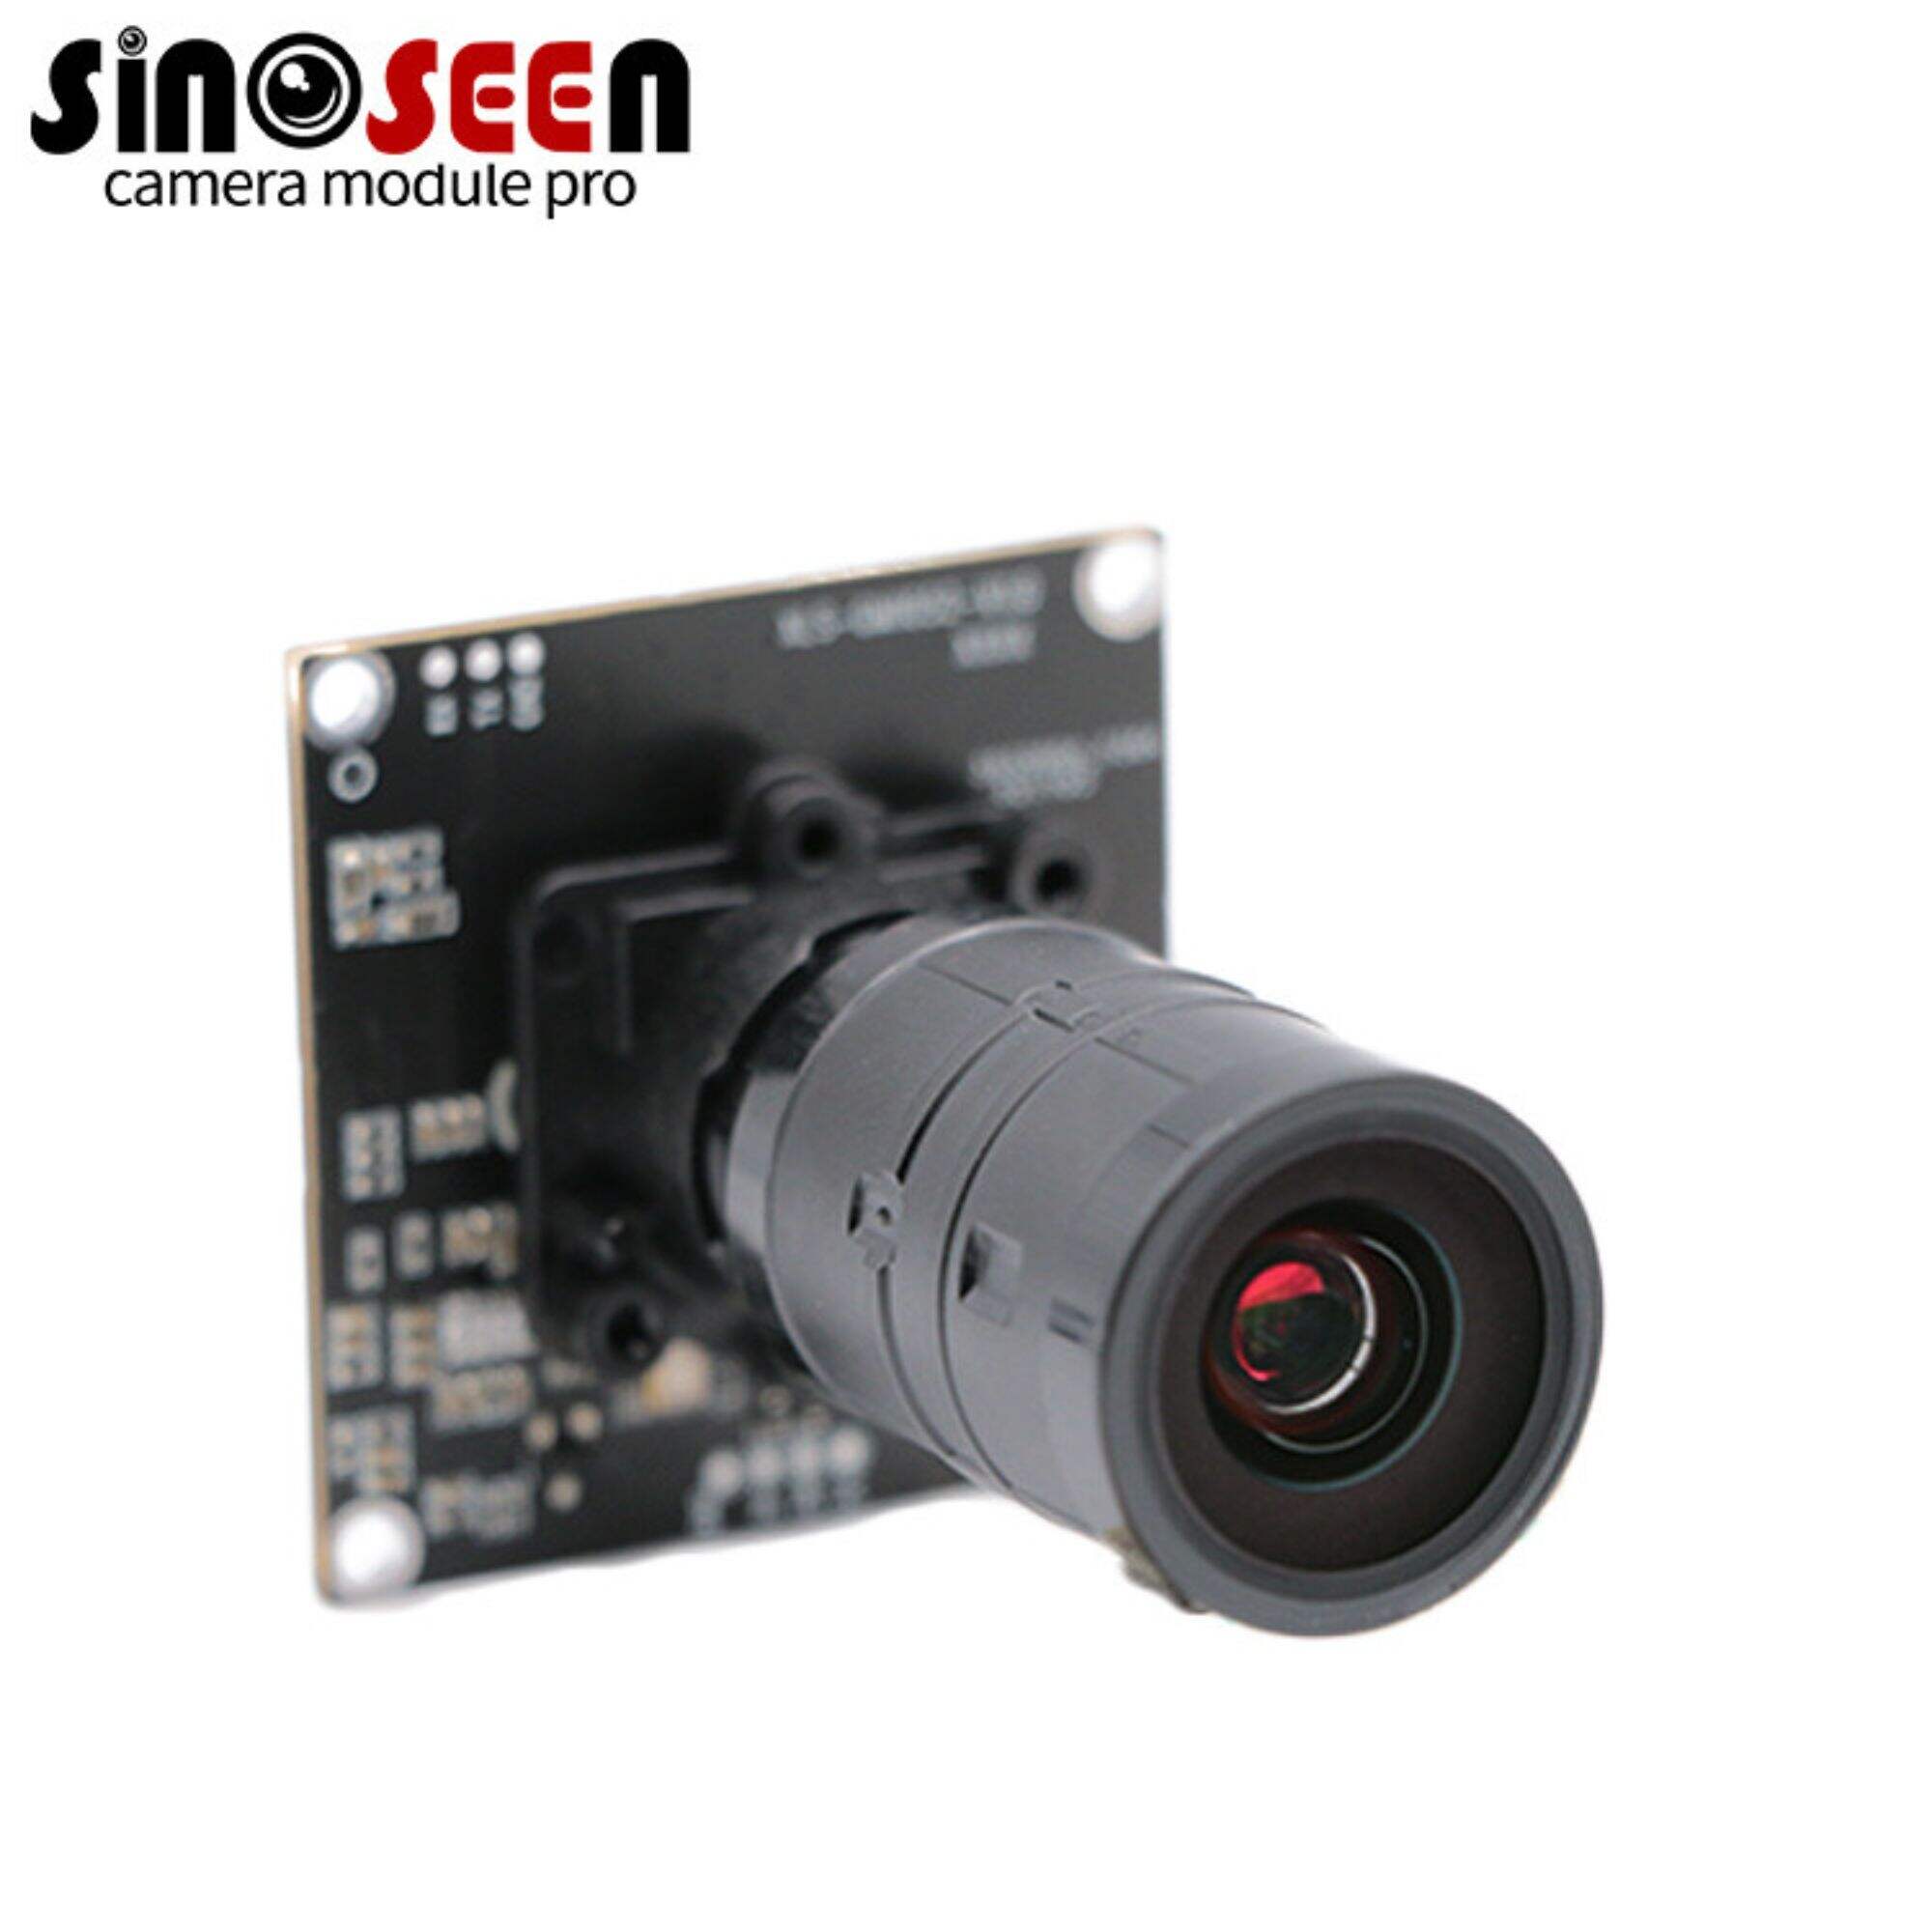 SC2210 Black Optical USB Night Vision Module for IoT Devices 1080P HD